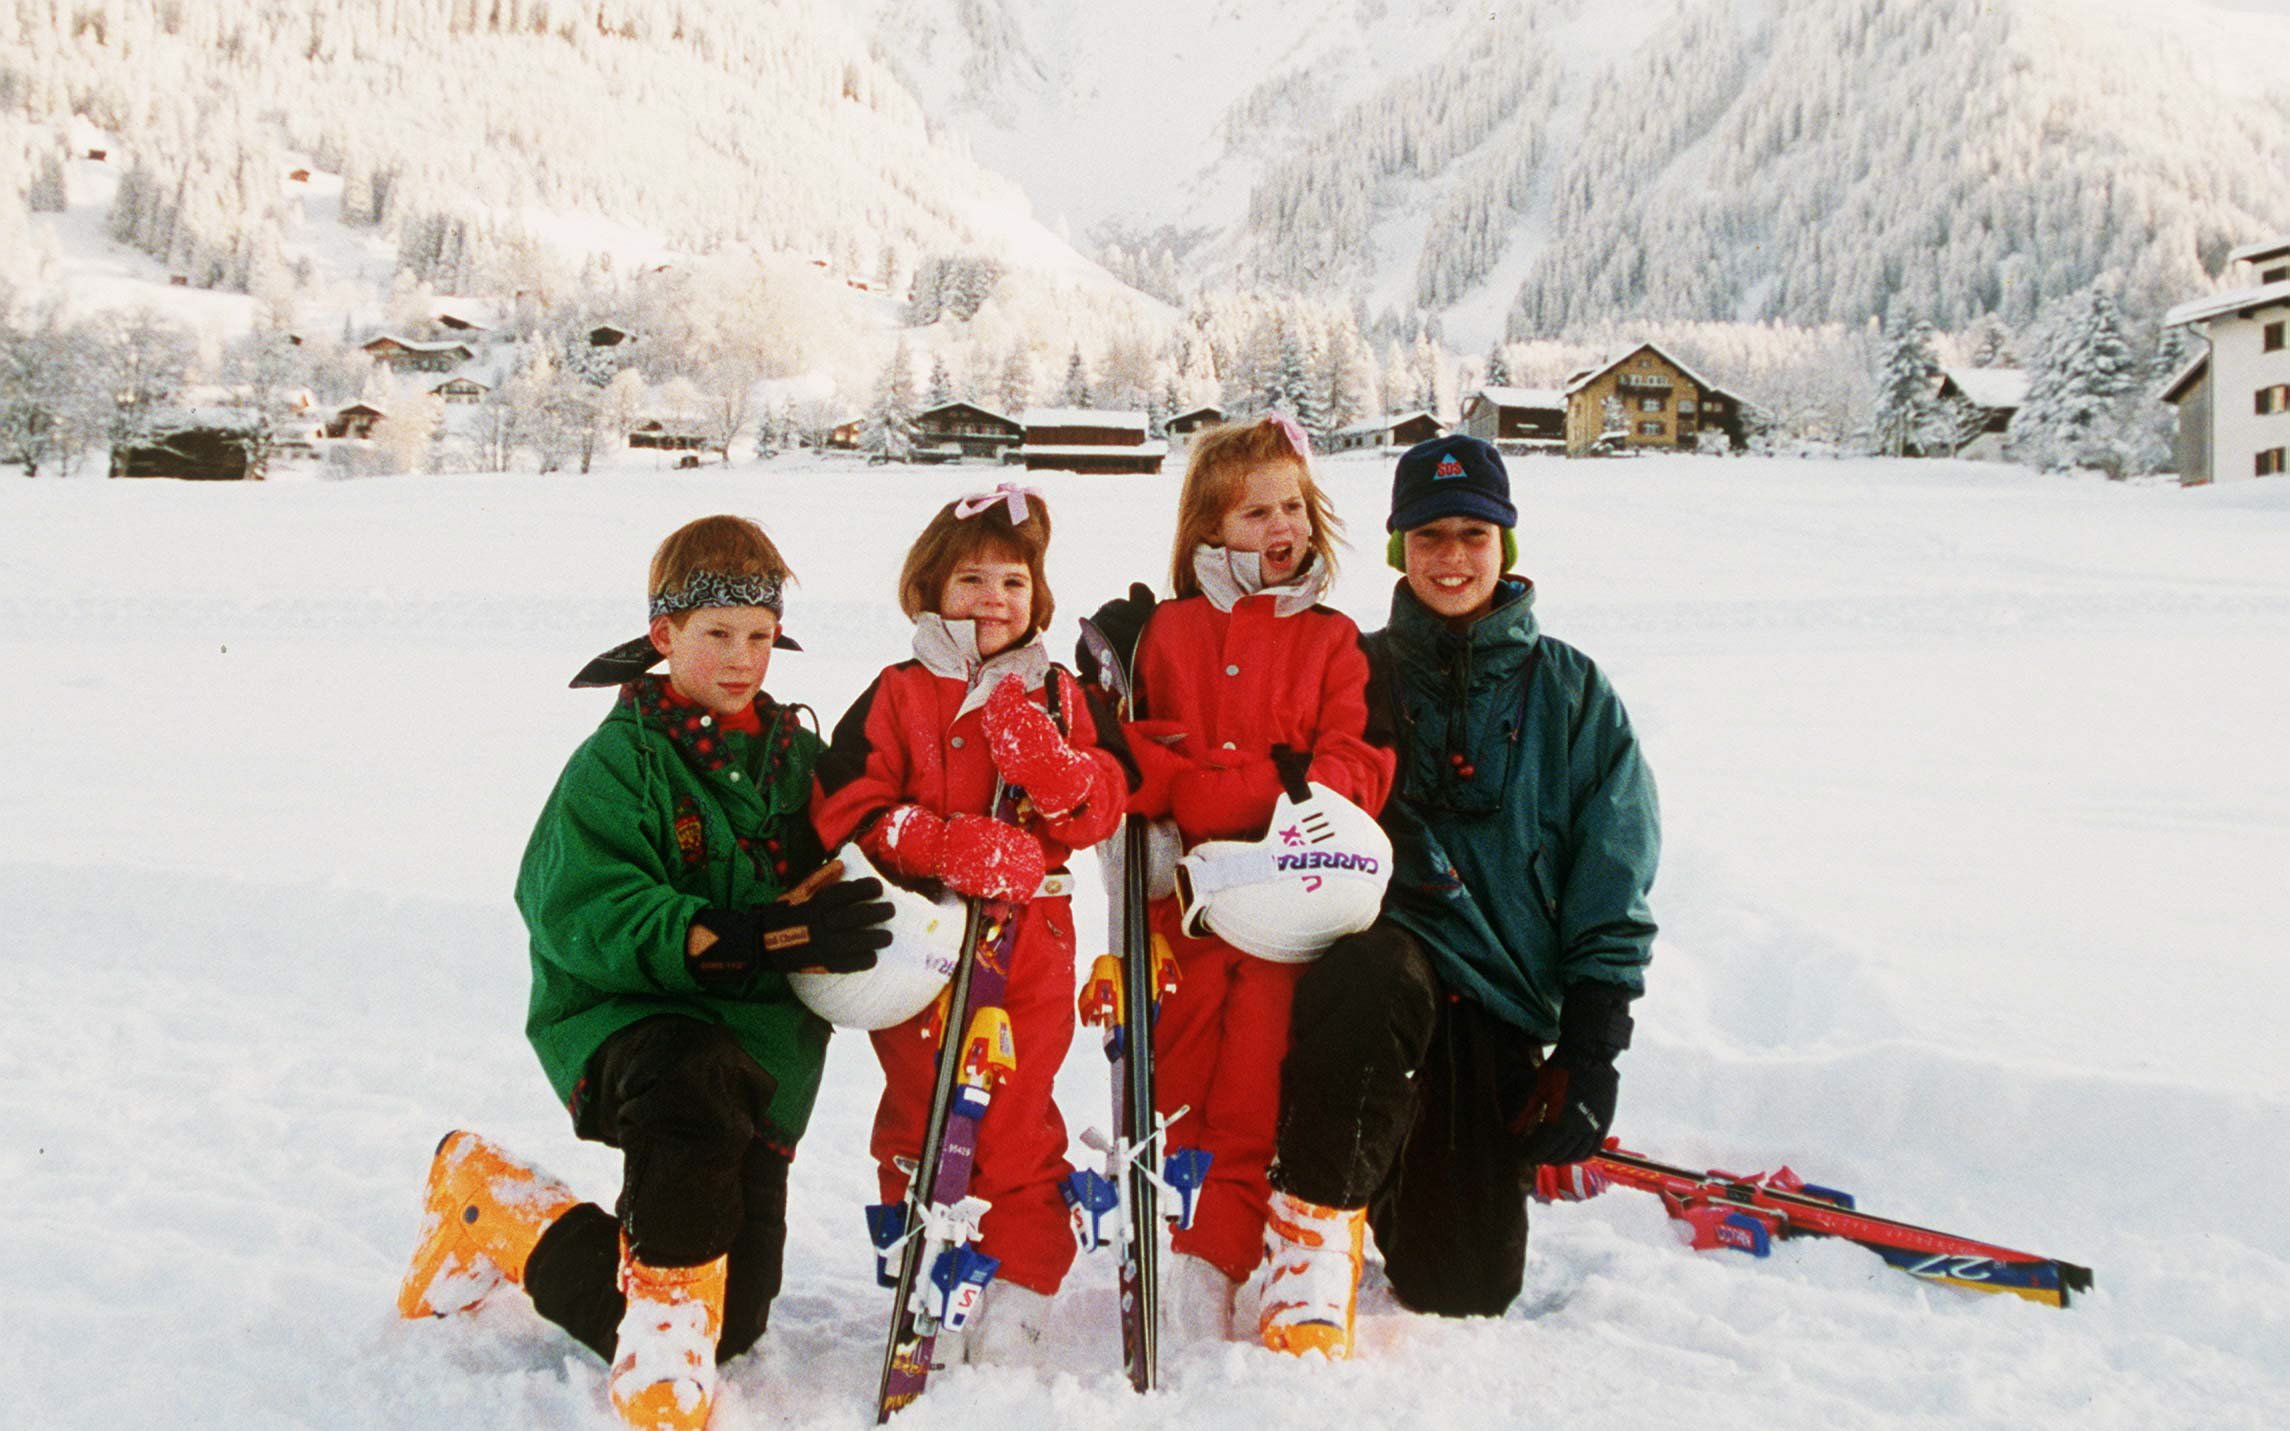 Prince William and Prince Harry pose for photo with Princess Beatrice and Princess Eugenie during ski trip in Klosters, Switzerland